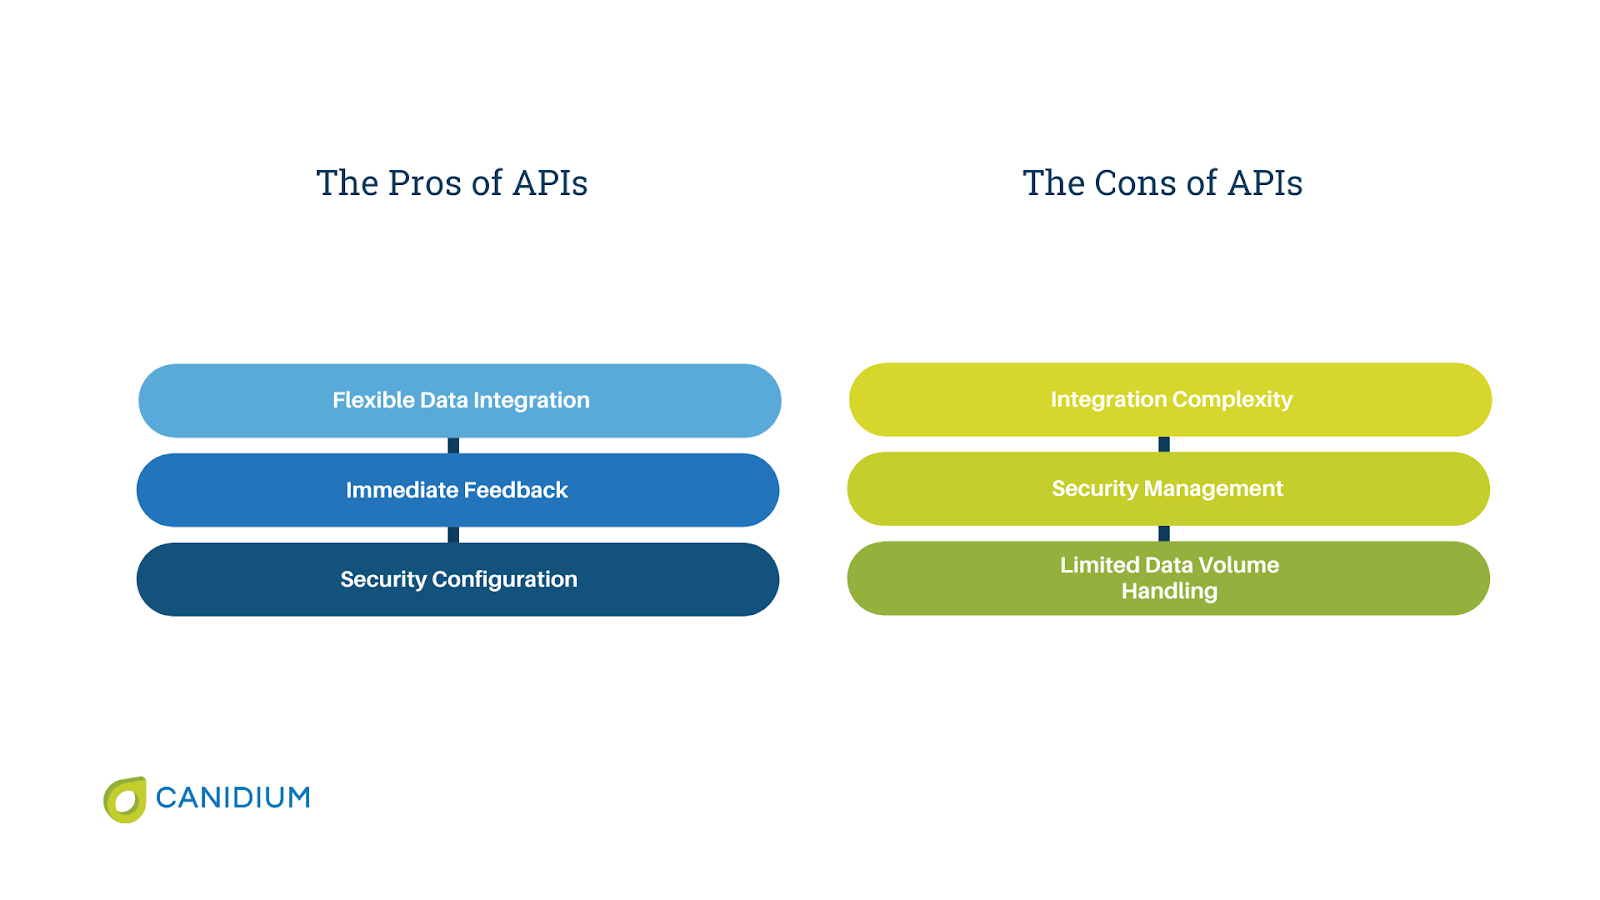 The pros and cons of APIs